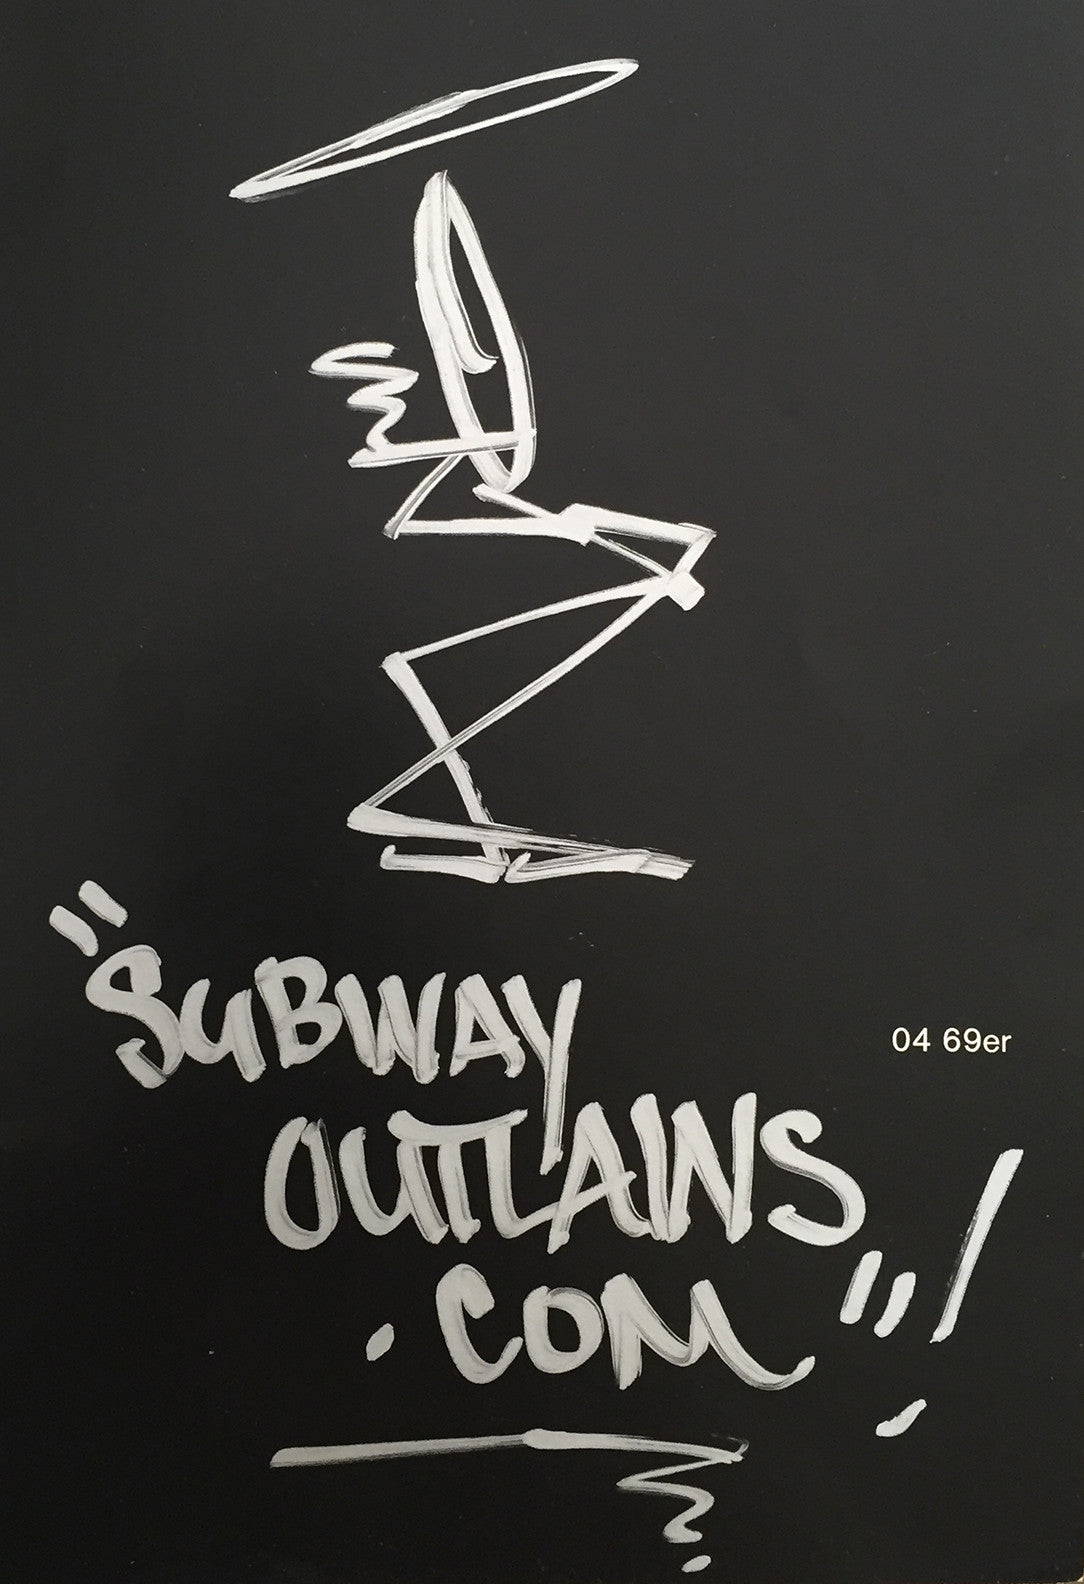 STAYHIGH 149 - "Subway Outlaws" drawing